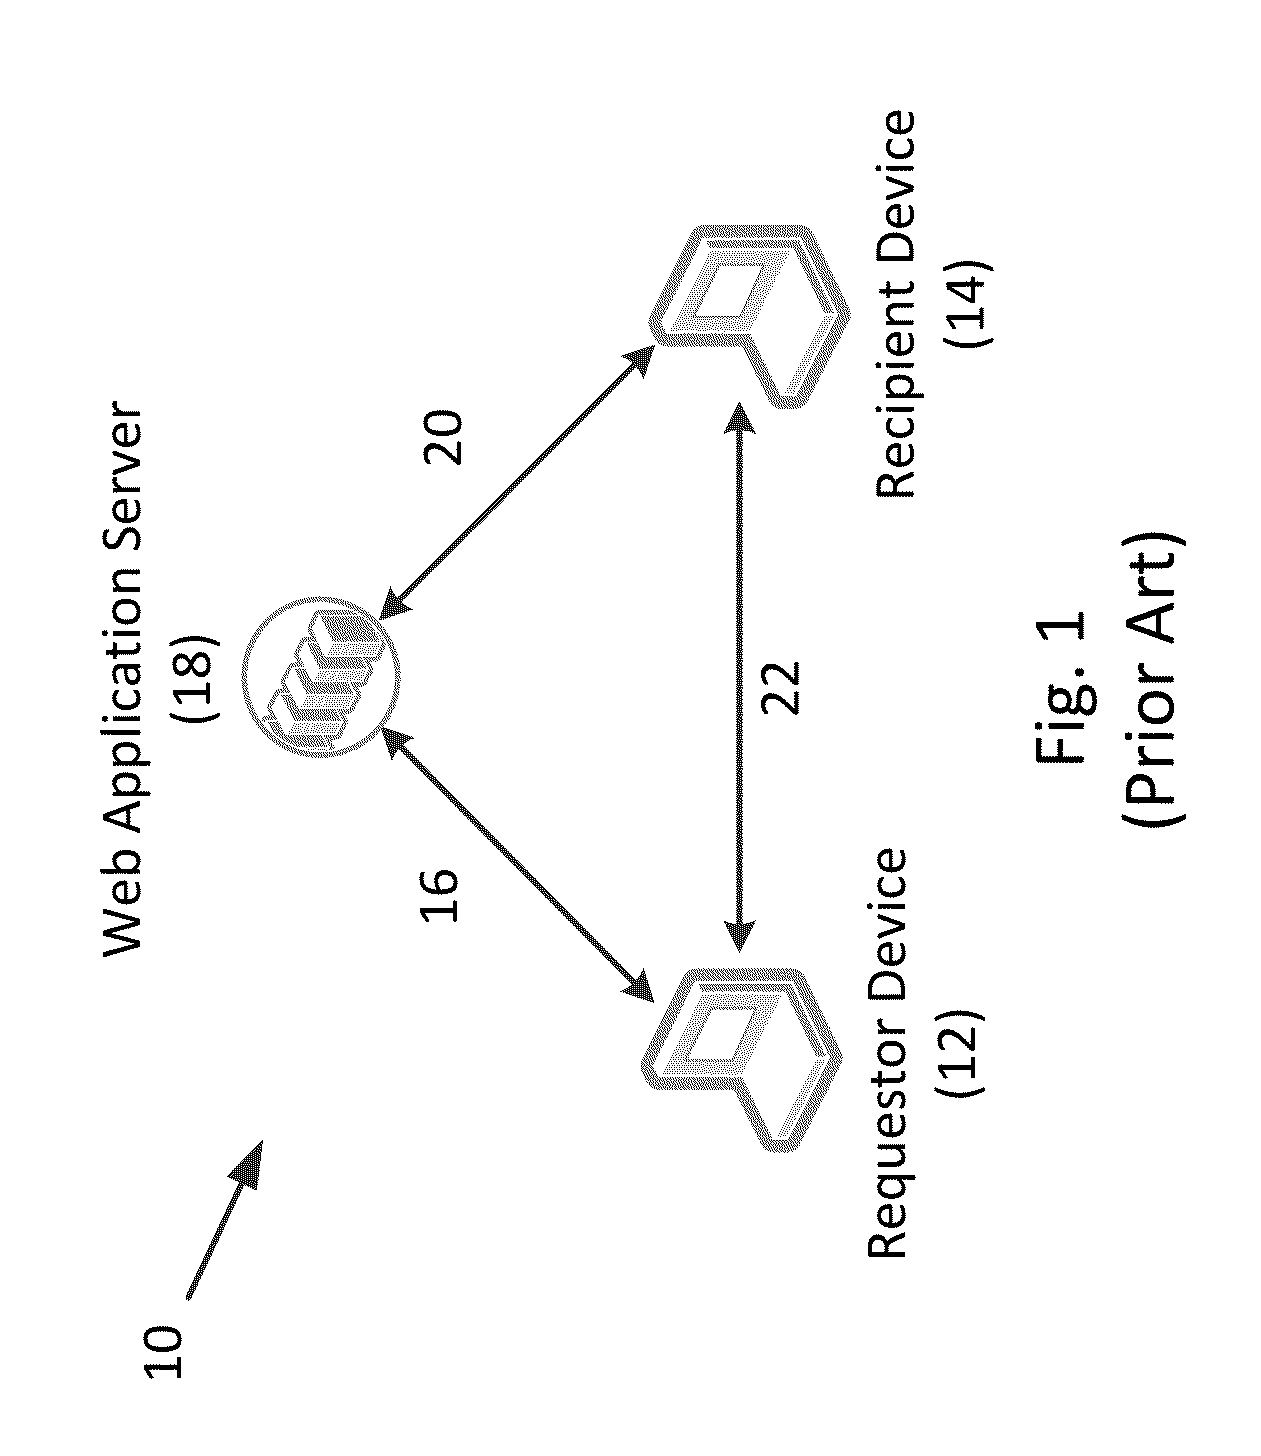 Intelligent notification of requests for real-time online interaction via real-time communications and/or markup protocols, and related methods, systems, and computer-readable media